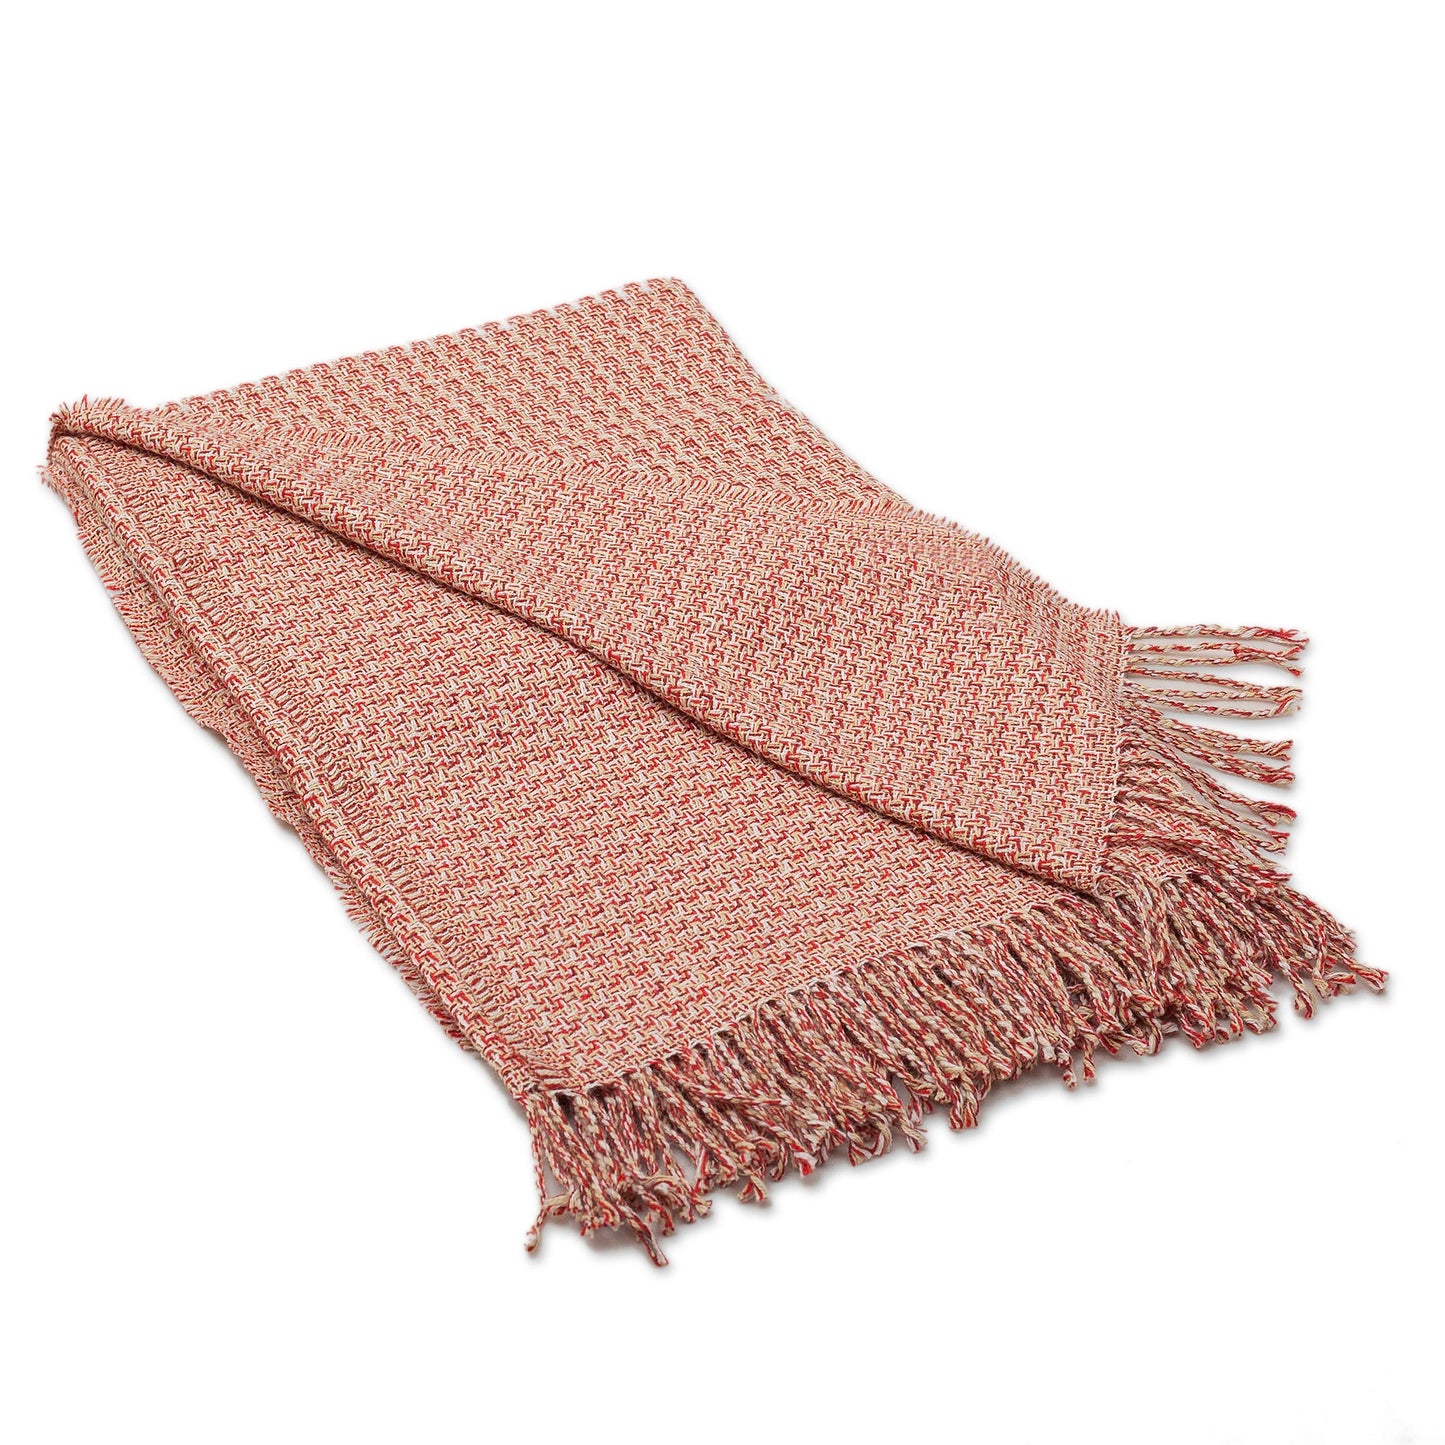 Cozy Combination in Flame Warm Alpaca Blend Throw Crafted in Peru